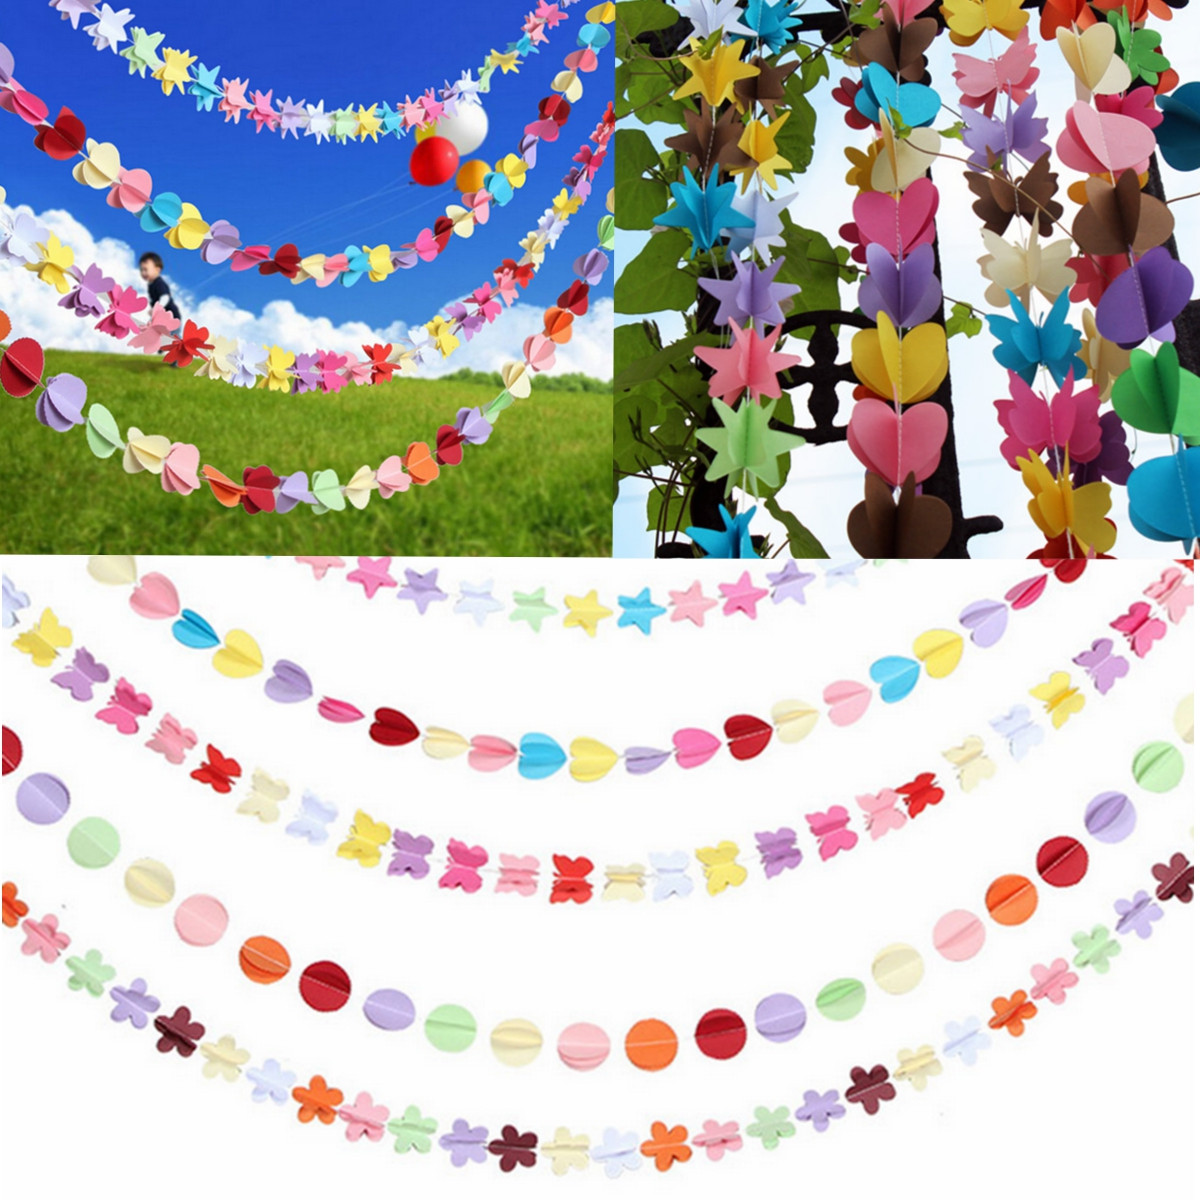 15M-Hanging-Paper-Garland-Chain-Wedding-Birthday-Party-Ceiling-Banner-Decoration-1031414